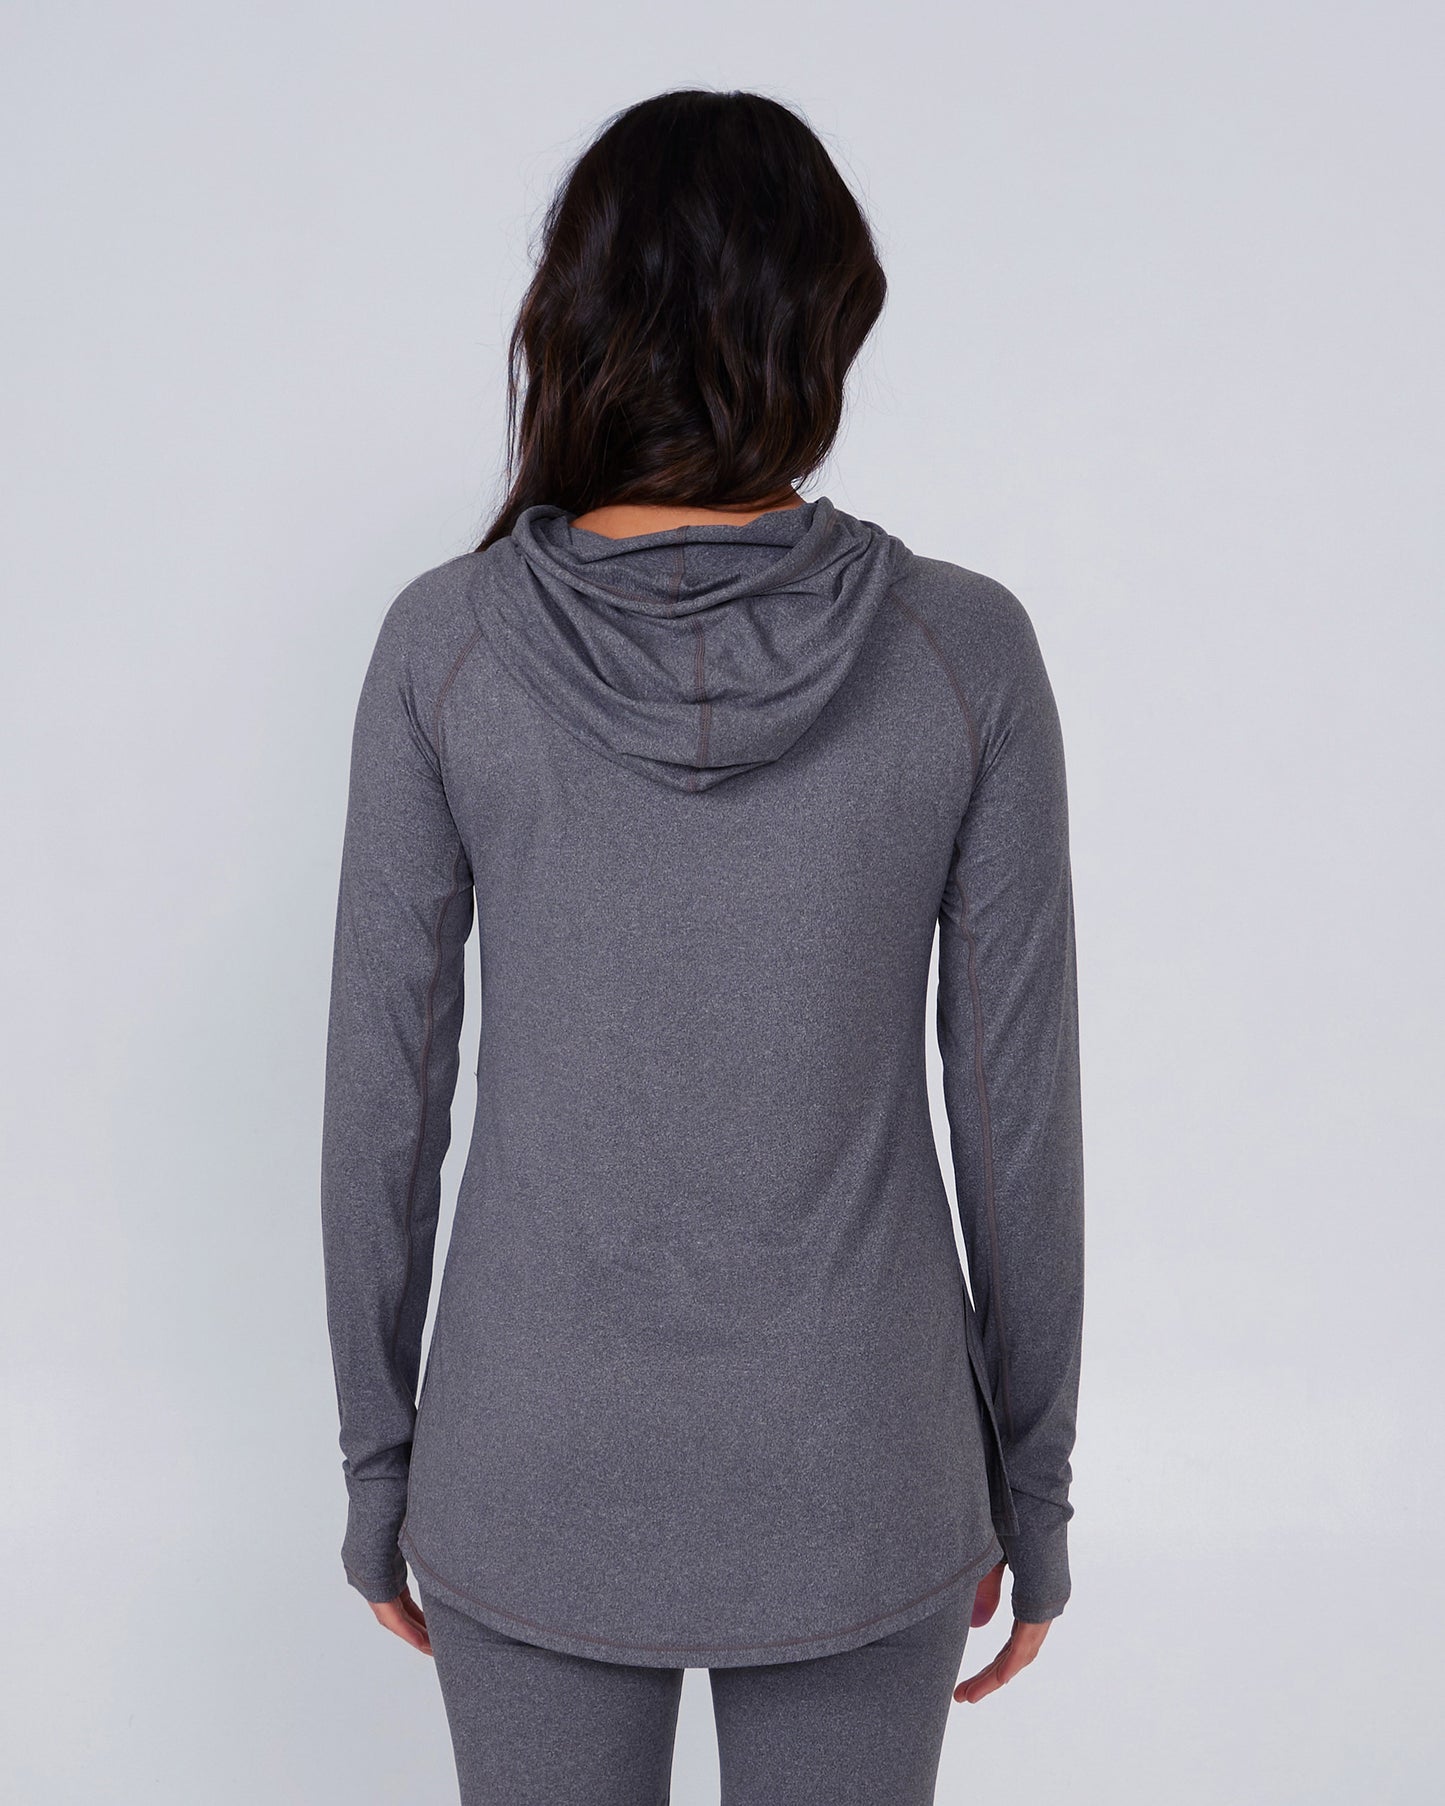 Thrill Seekers Charcoal Hooded Sunshirt